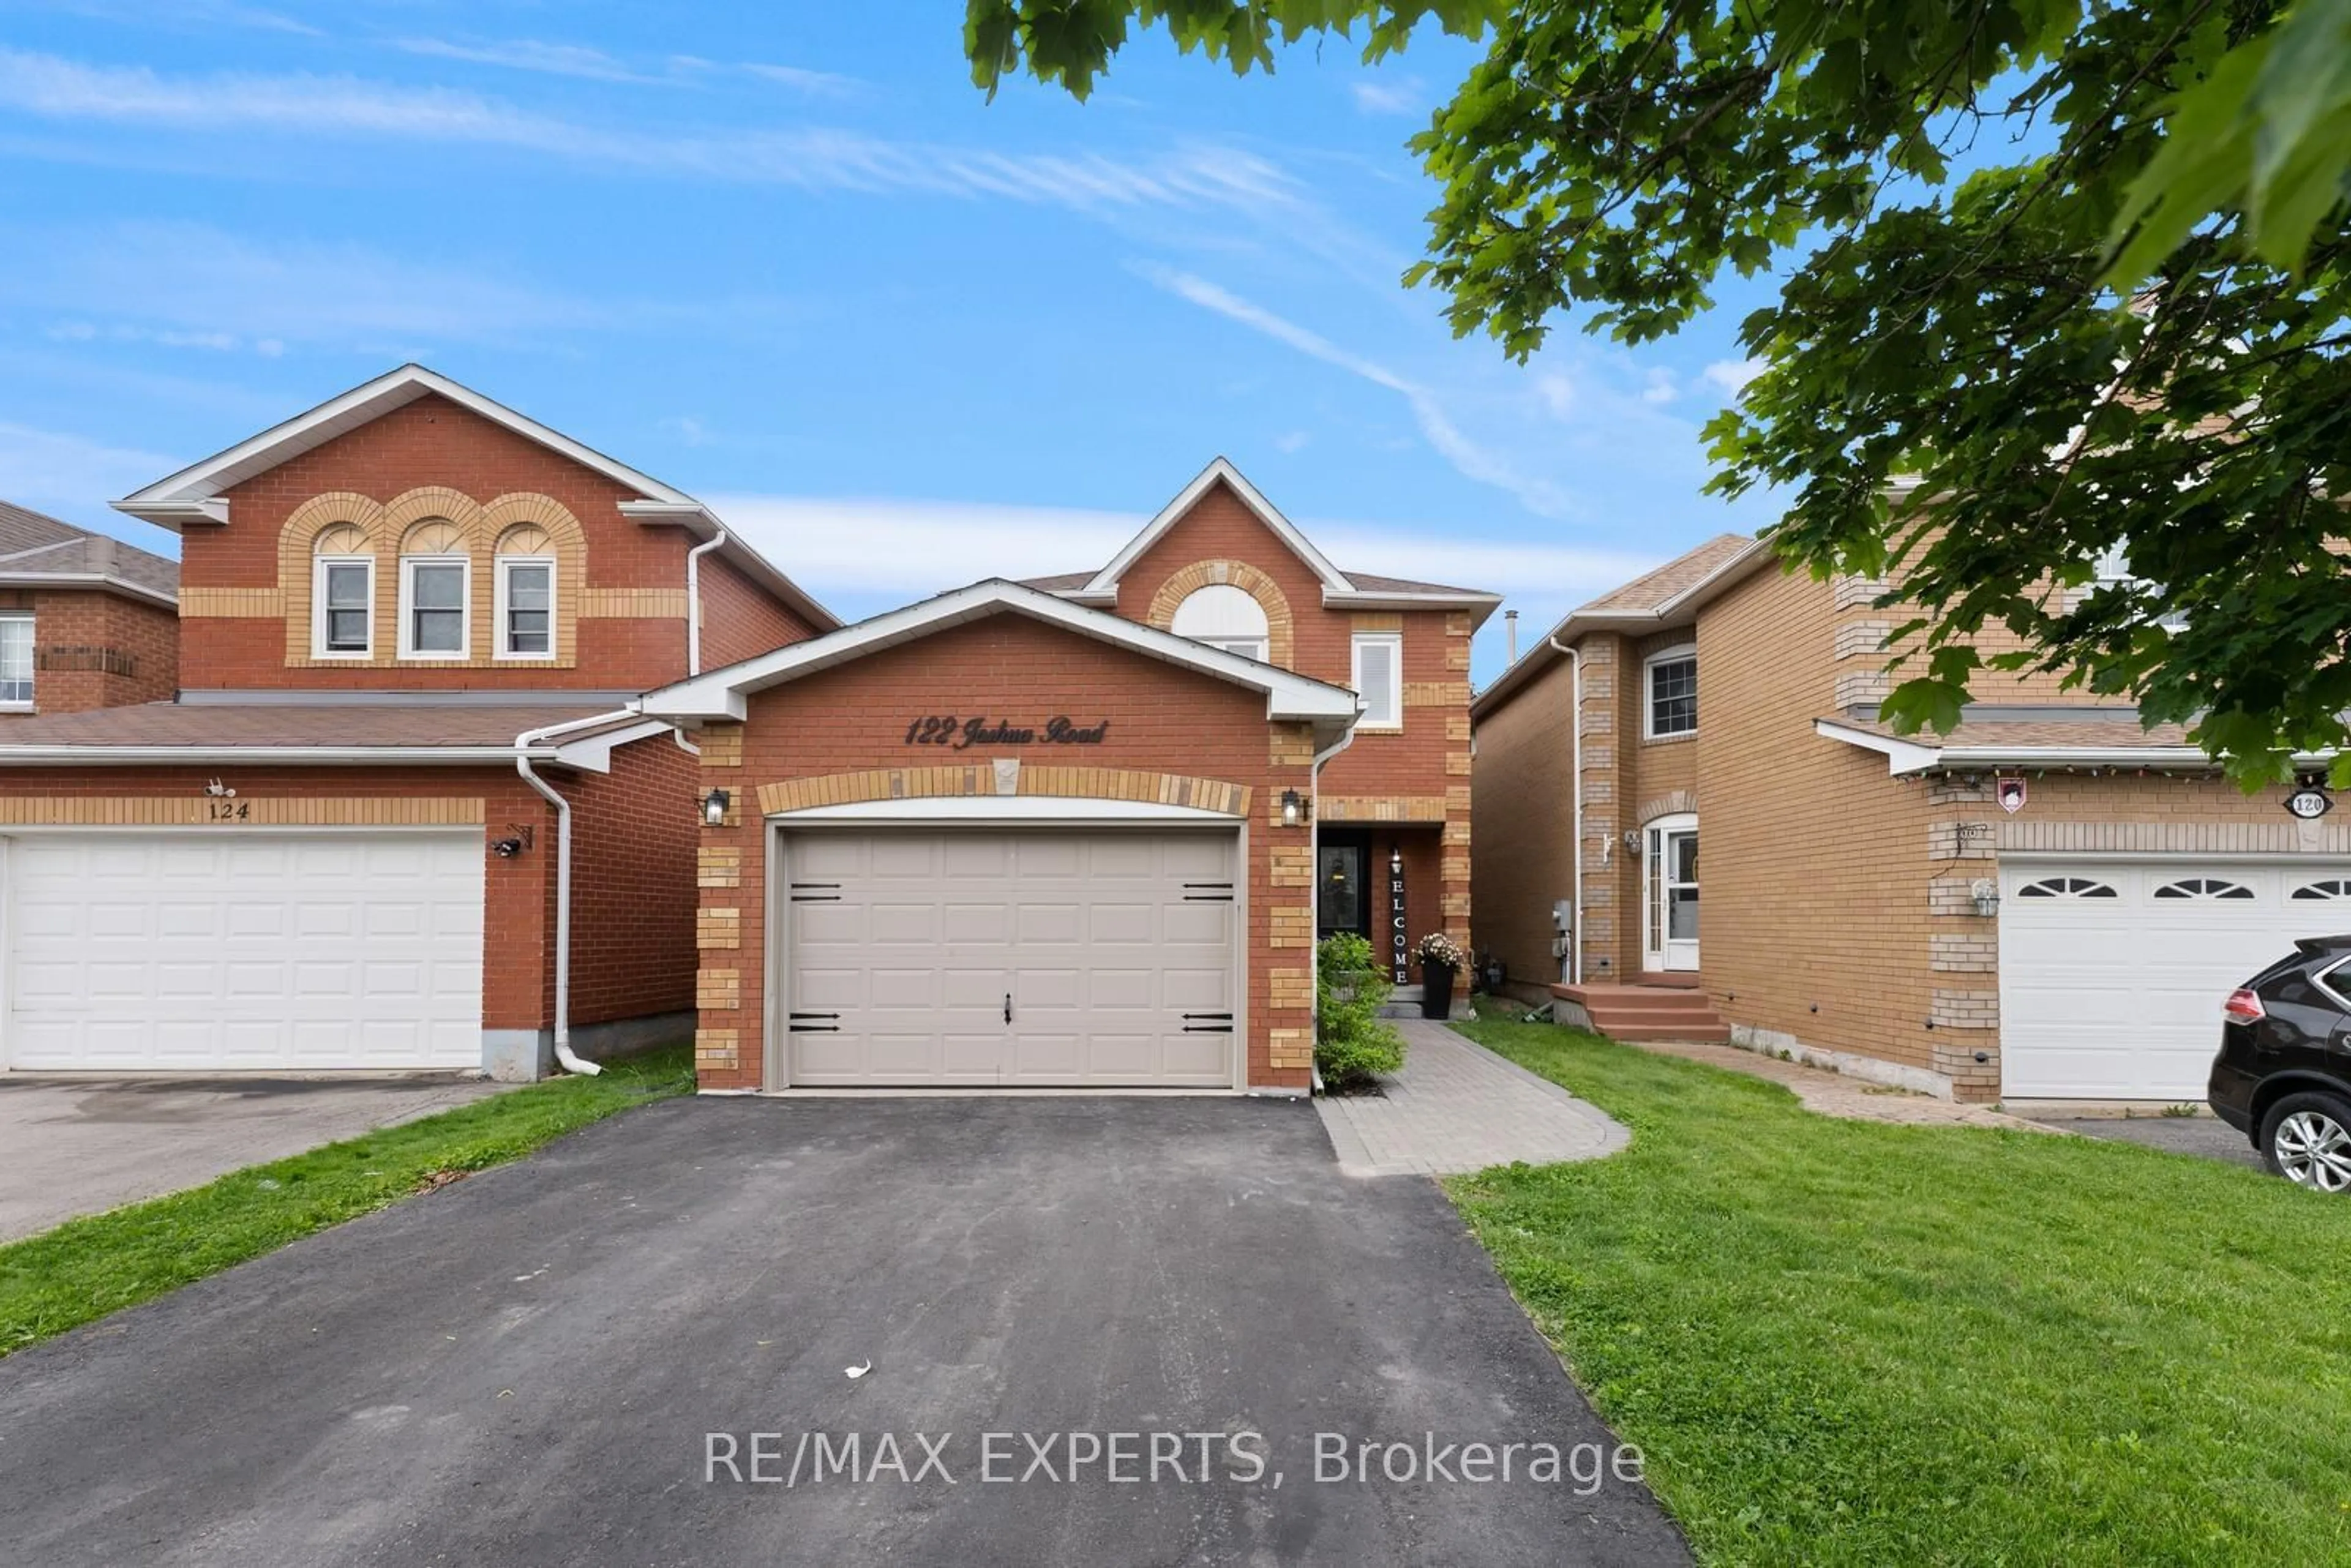 Frontside or backside of a home for 122 Joshua Rd, Orangeville Ontario L9W 4W2